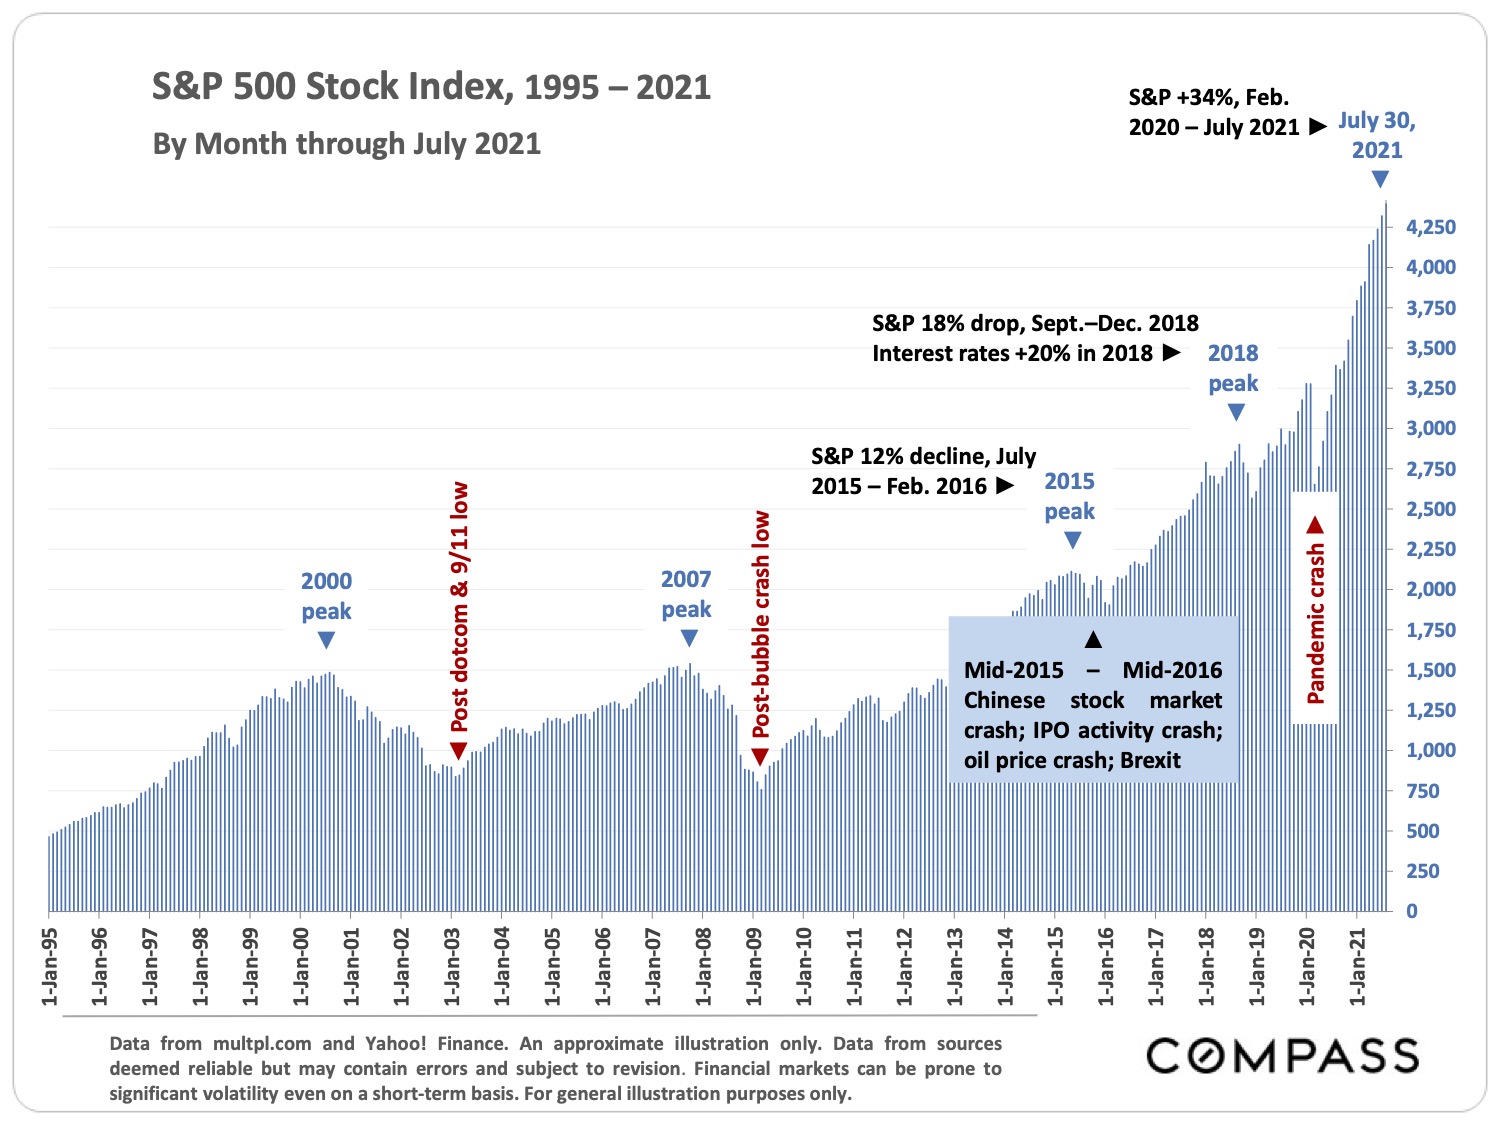 Image of S&P 500 Stock Index from 1995 to 2021 By Month through July 2021